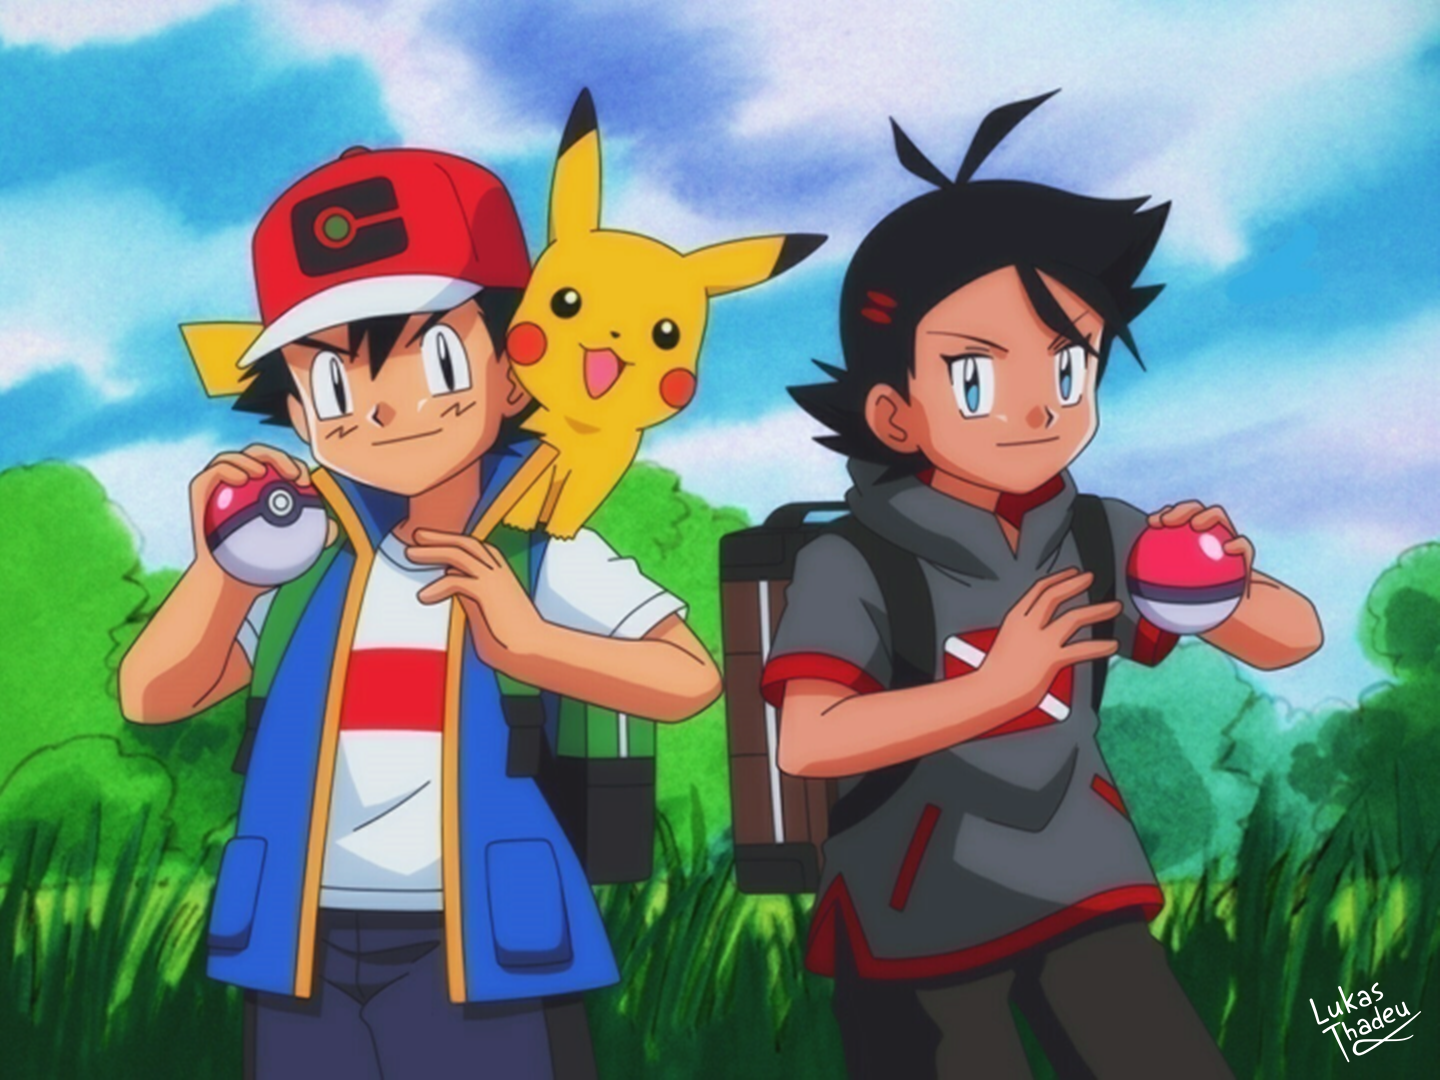 Pokemon ash picture - 🧡 Pokemon Ash Pictures posted by Zoey Johnson.